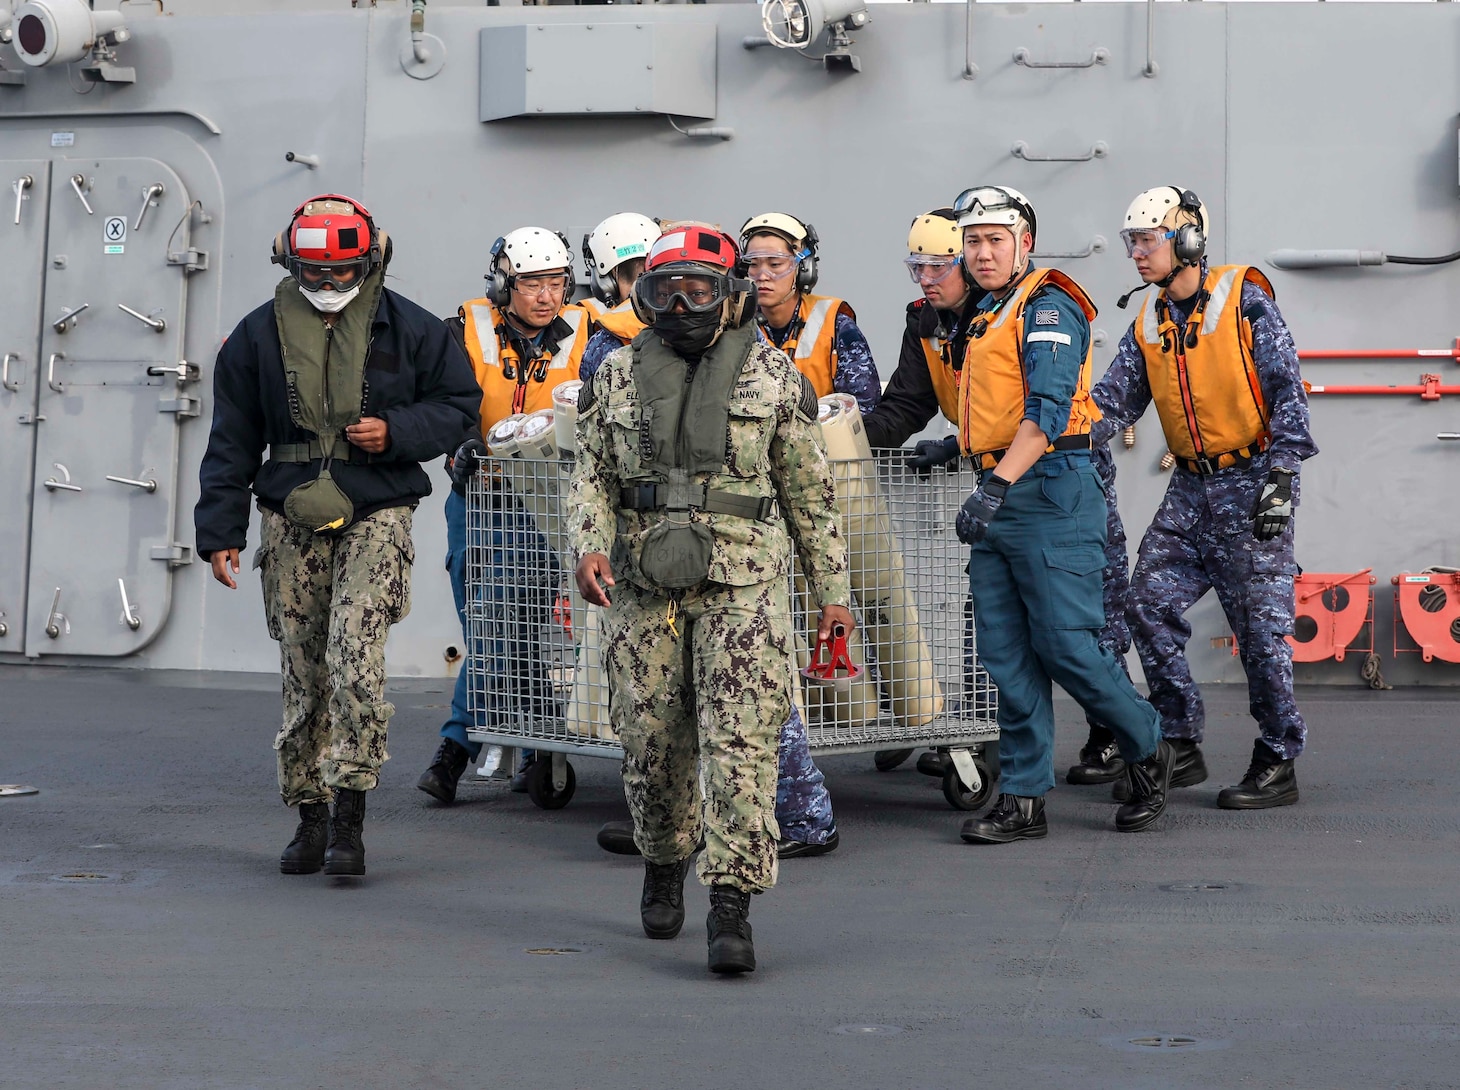 PHILIPPINE SEA (Dec. 6, 2022) Aviation Ordnanceman 2nd Class Elouise Ellis, Aviation Ordnanceman Airman Tymira Holland and Japan Maritime Self-Defense Force (JMSDF) sailors load sonobuoys into an MH-60R Sea Hawk helicopter assigned to the “Warlords” of Helicopter Maritime Strike Squadron (HSM) 51 aboard the multi-purpose destroyer JS Izumo (DDH 183) during a bi-lateral anti-submarine warfare (ASW) exercise, Dec. 6. The U.S. Navy and JMSDF regularly fly, sail and operate together with other Allies and partners to promote security and stability throughout the region. (U.S. Navy photo by Mass Communication Specialist 1st Class Deanna C. Gonzales)